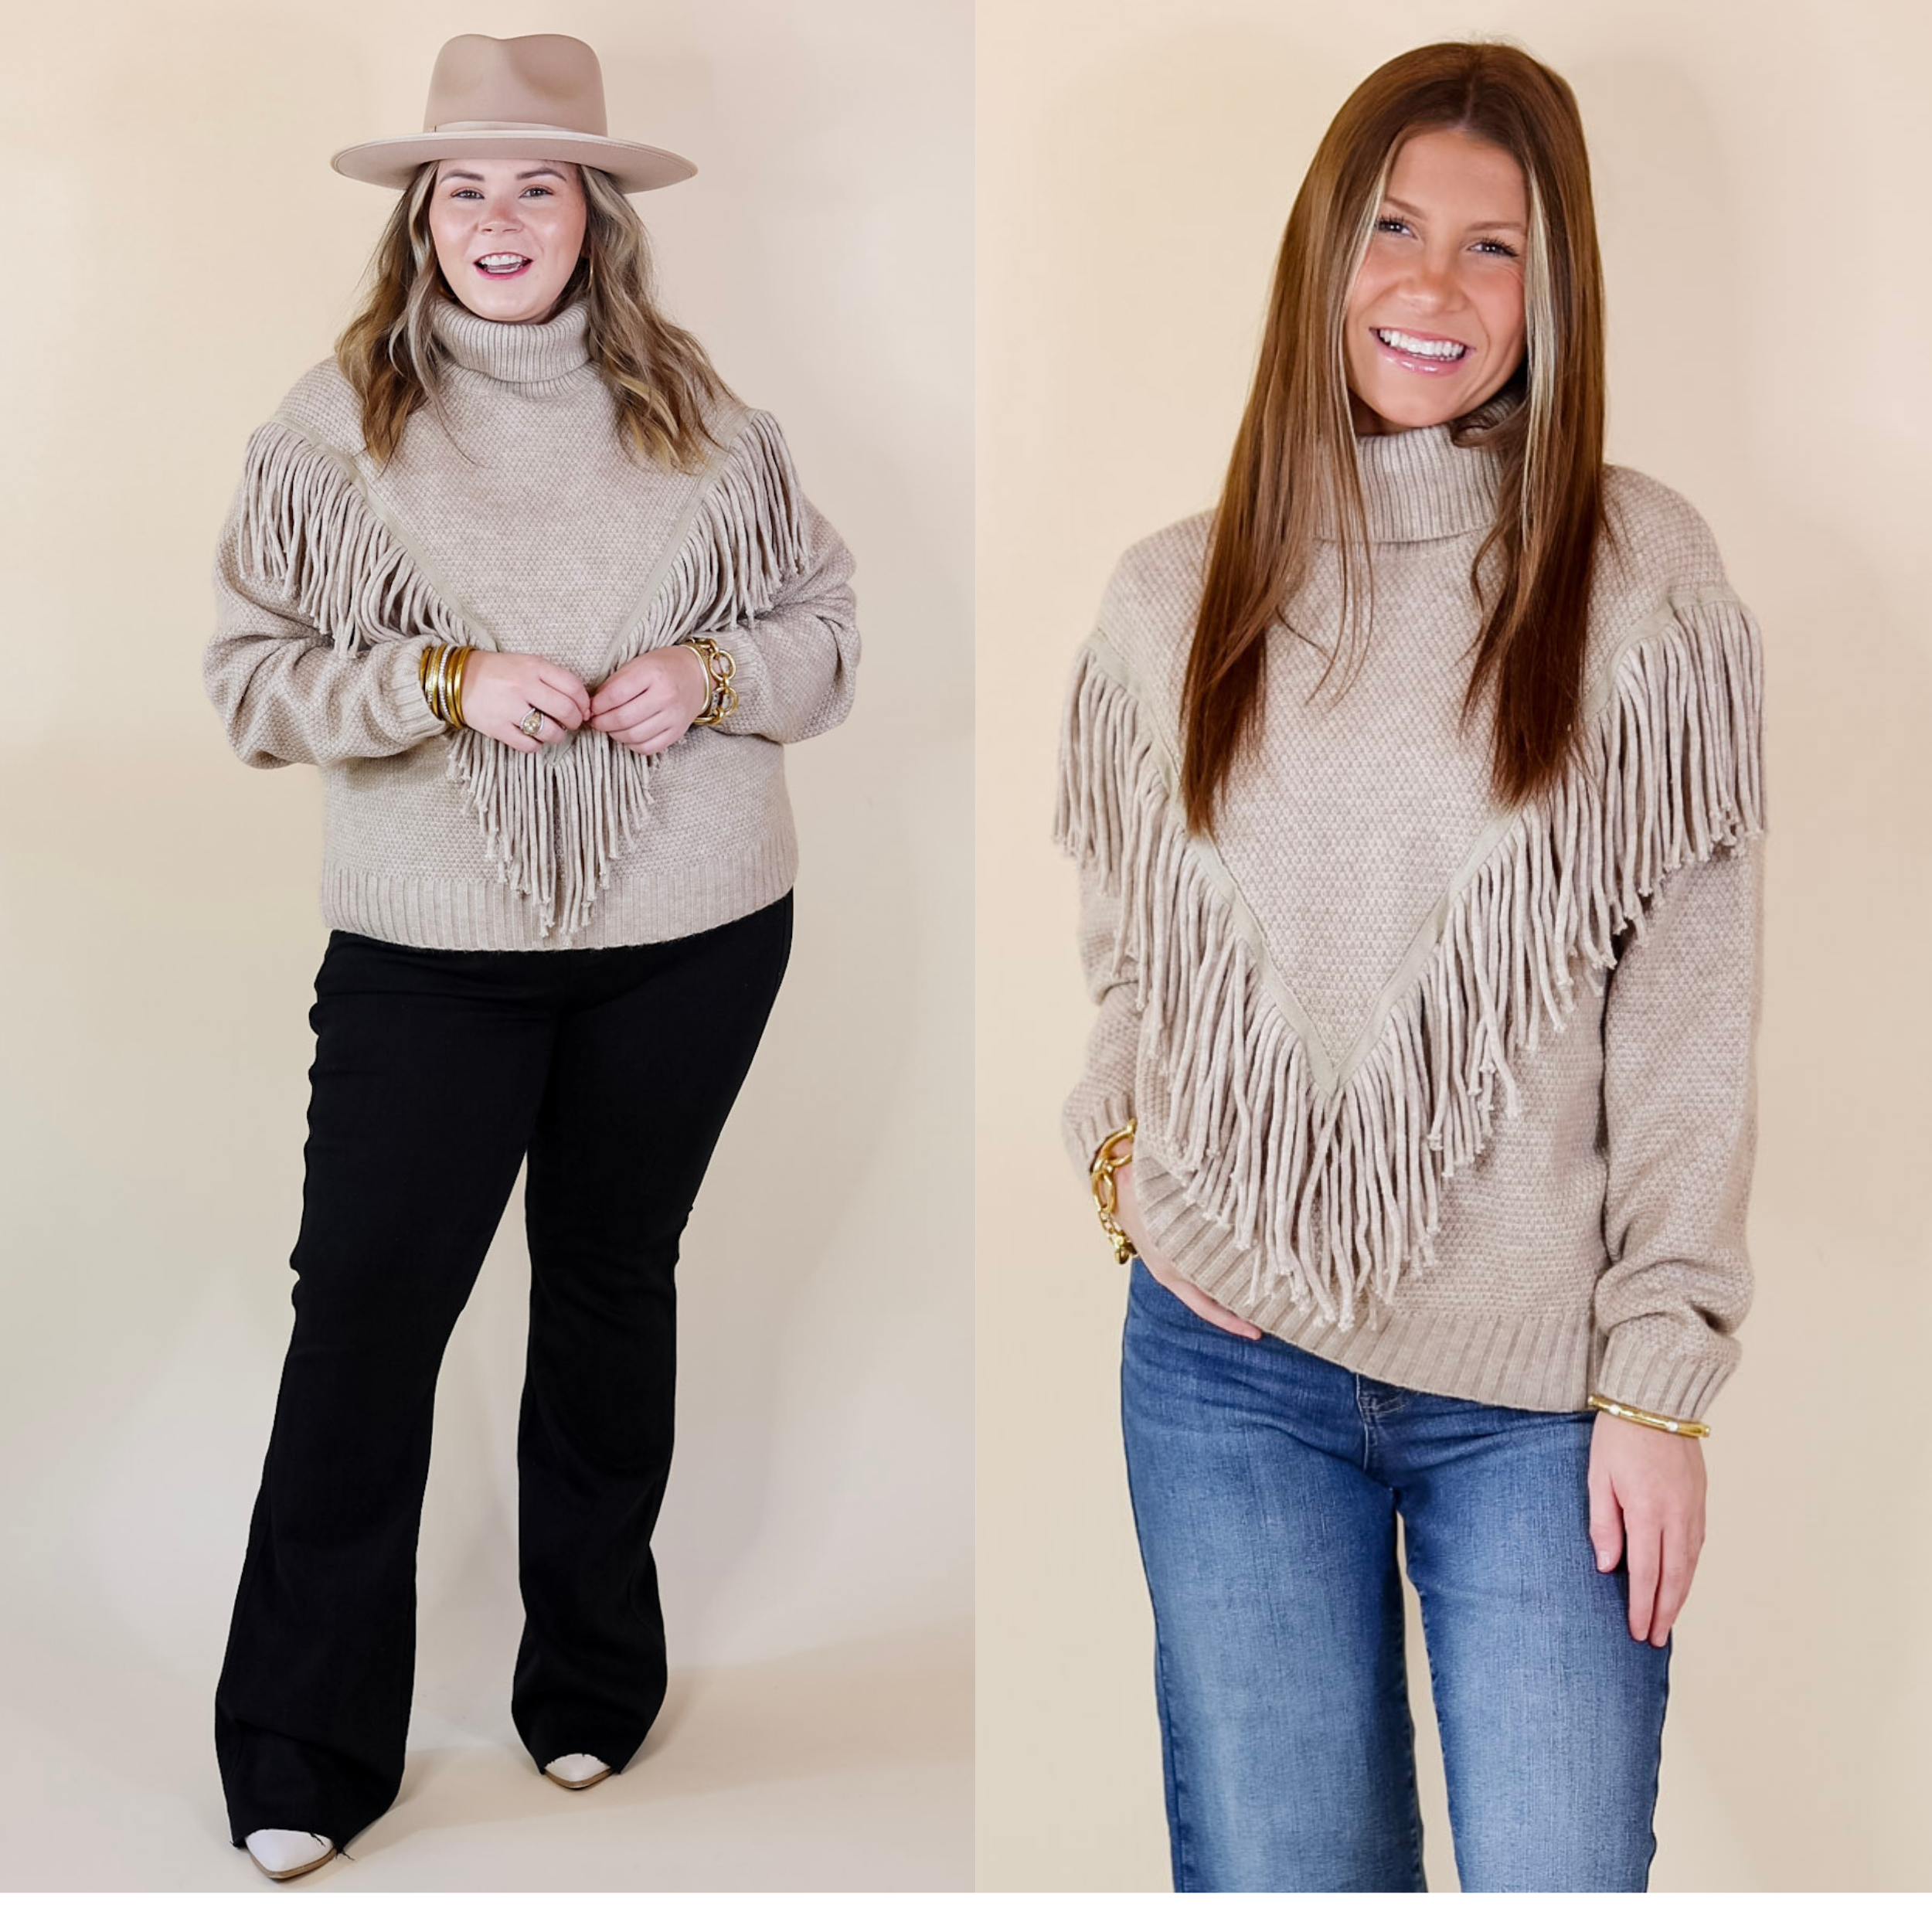 In the picture the model is wearing a turtleneck sweater with fringe in taupe with a white background